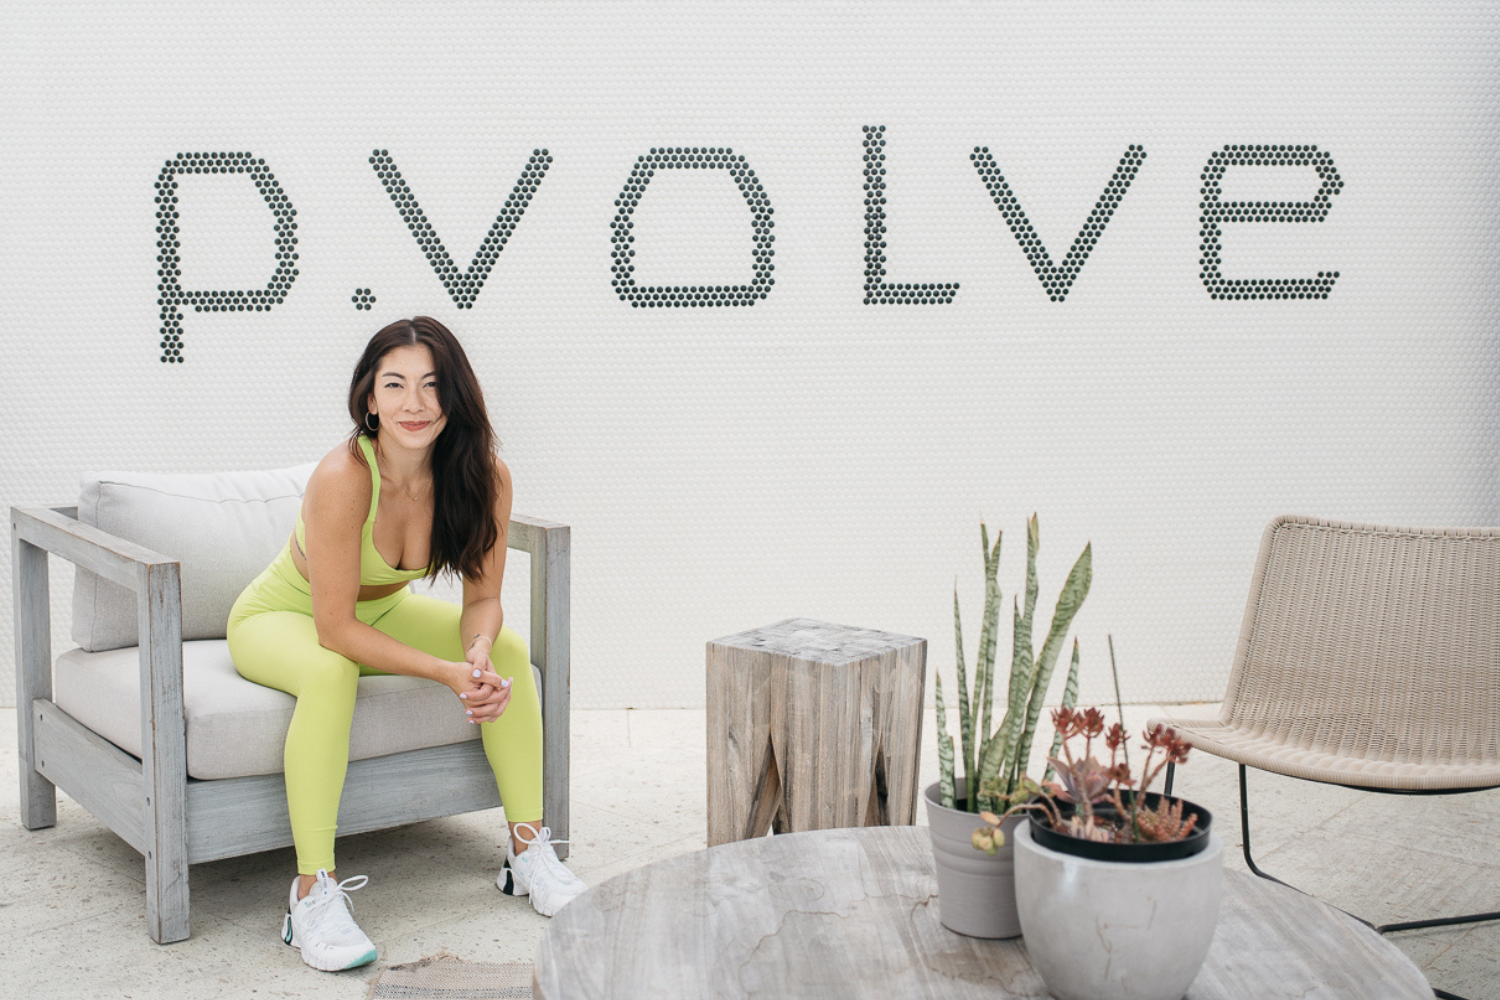 Move In Beyond: Building Strength and Community with Dani Coleman